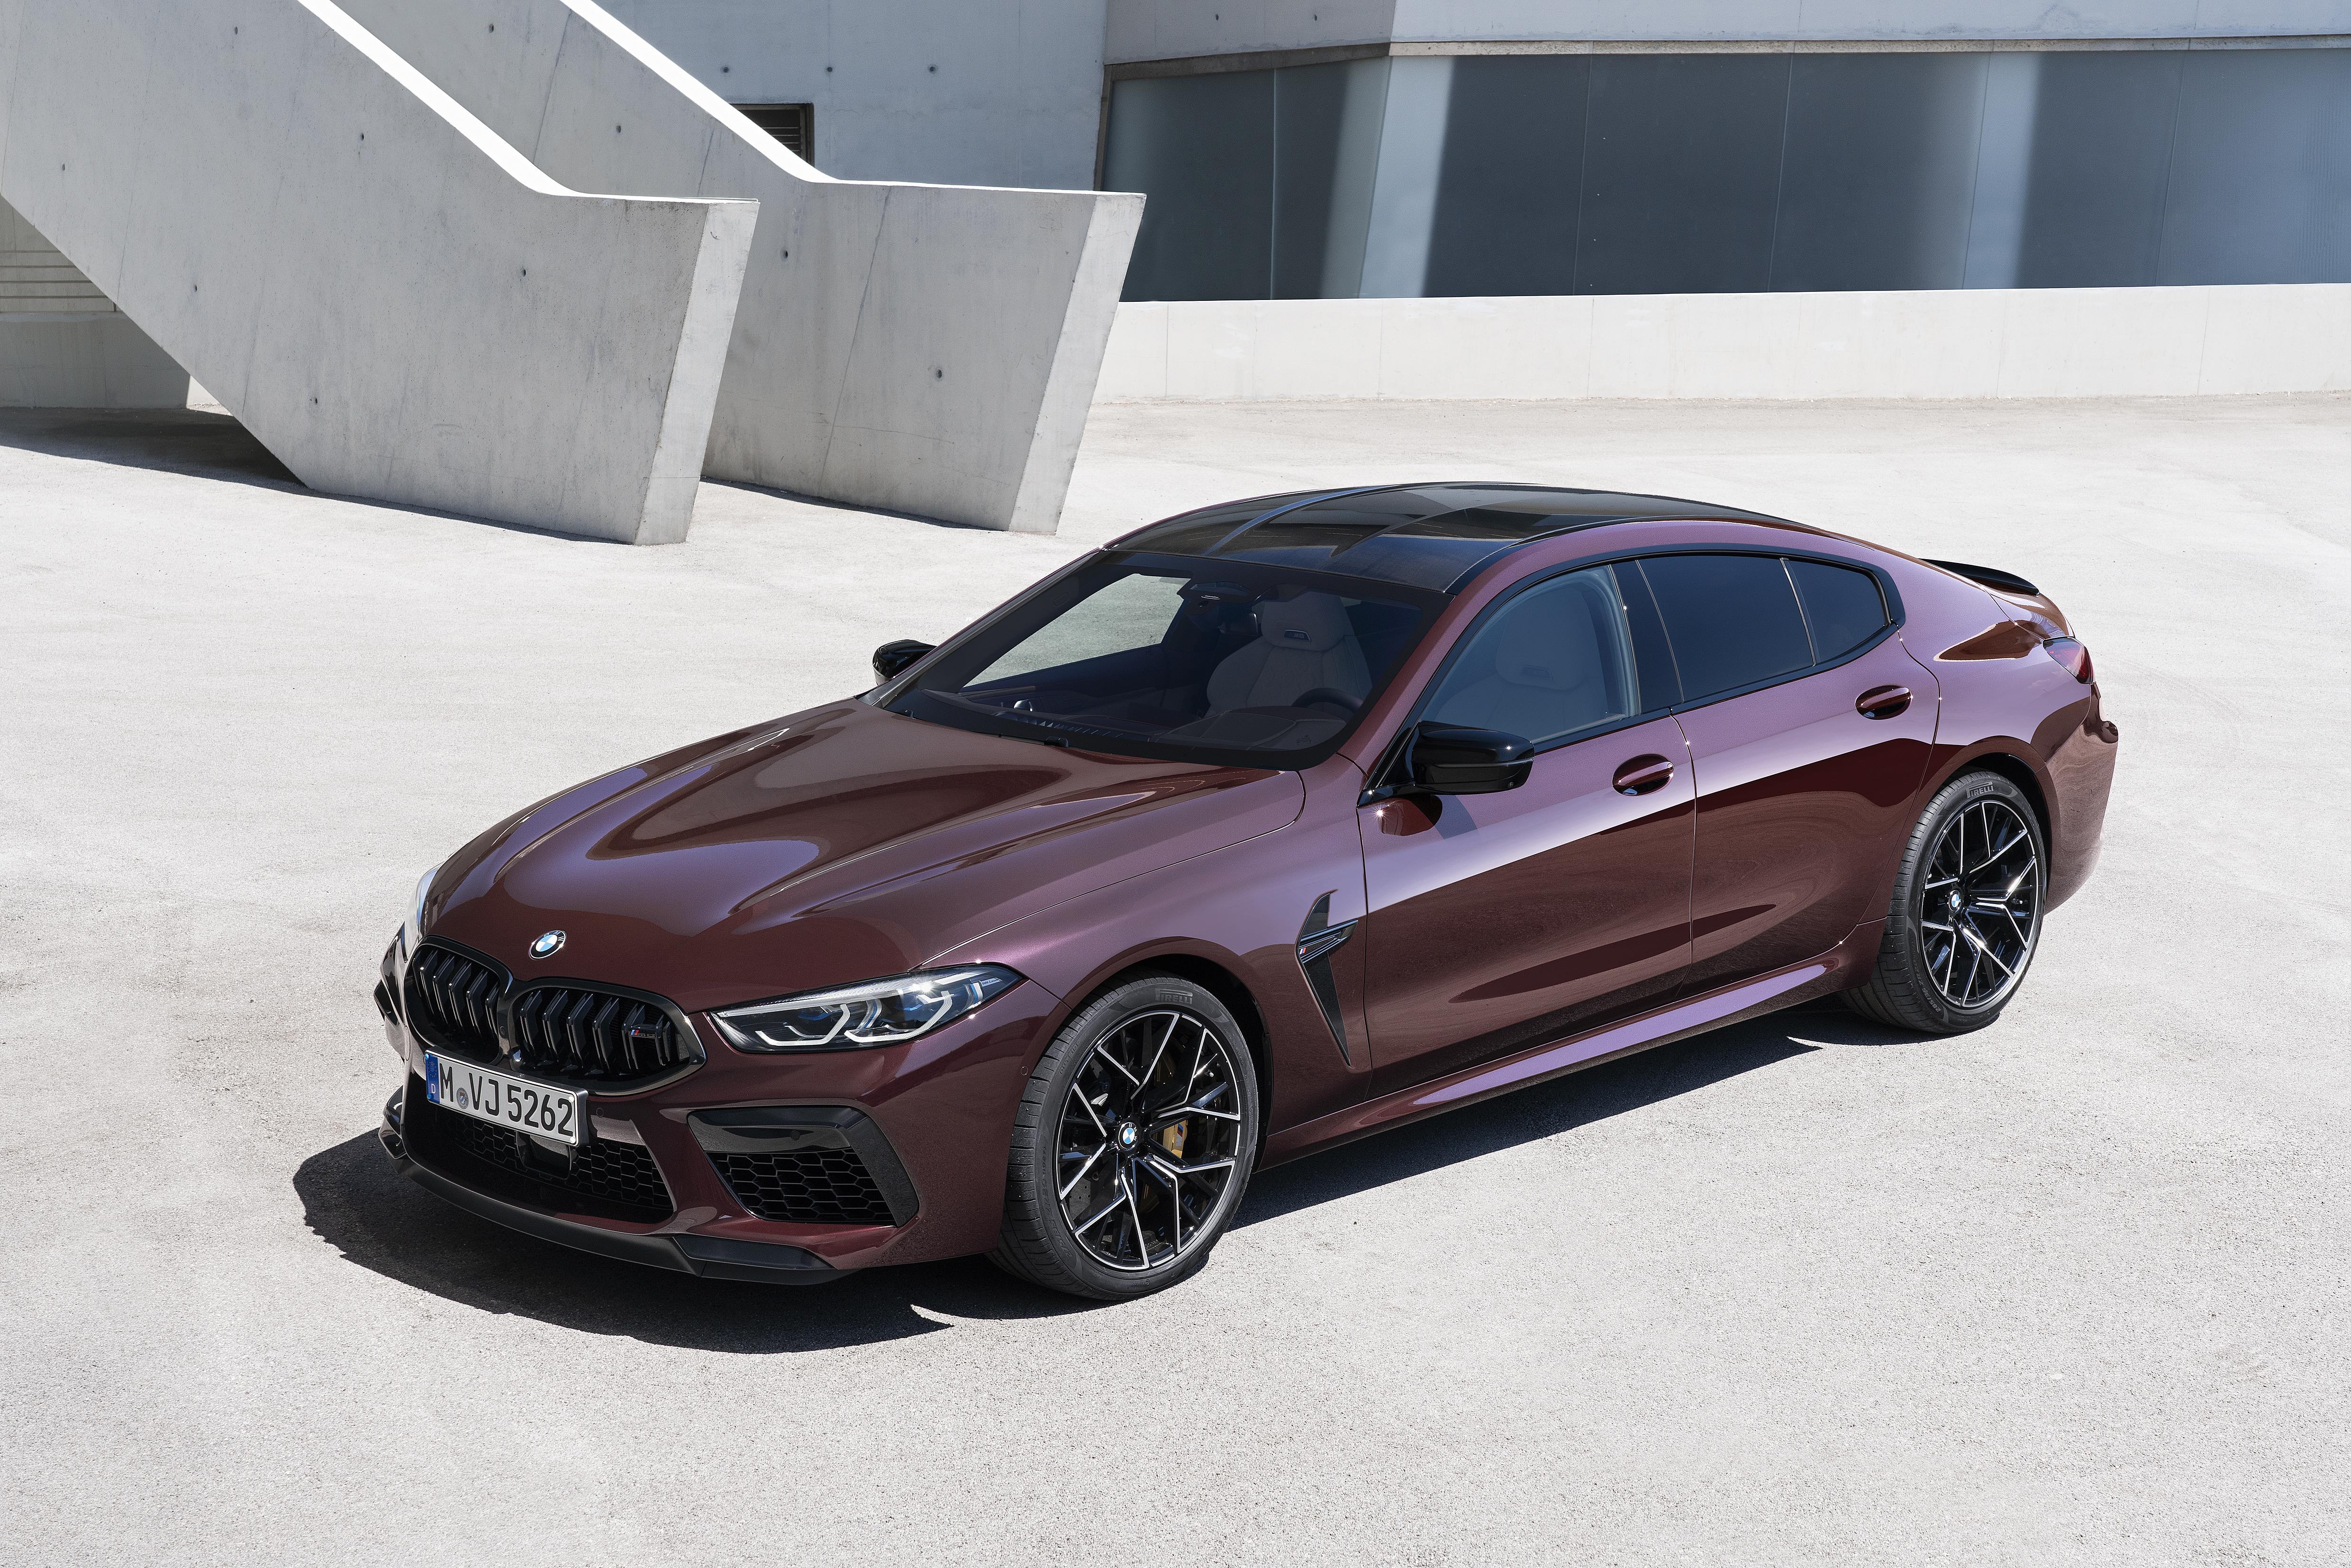 M 8 competition. BMW m8 Gran Coupe. BMW m8 Coupe 2020. BMW m8 Gran Coupe 2020. BMW m8 Gran Coupe Competition 2020.